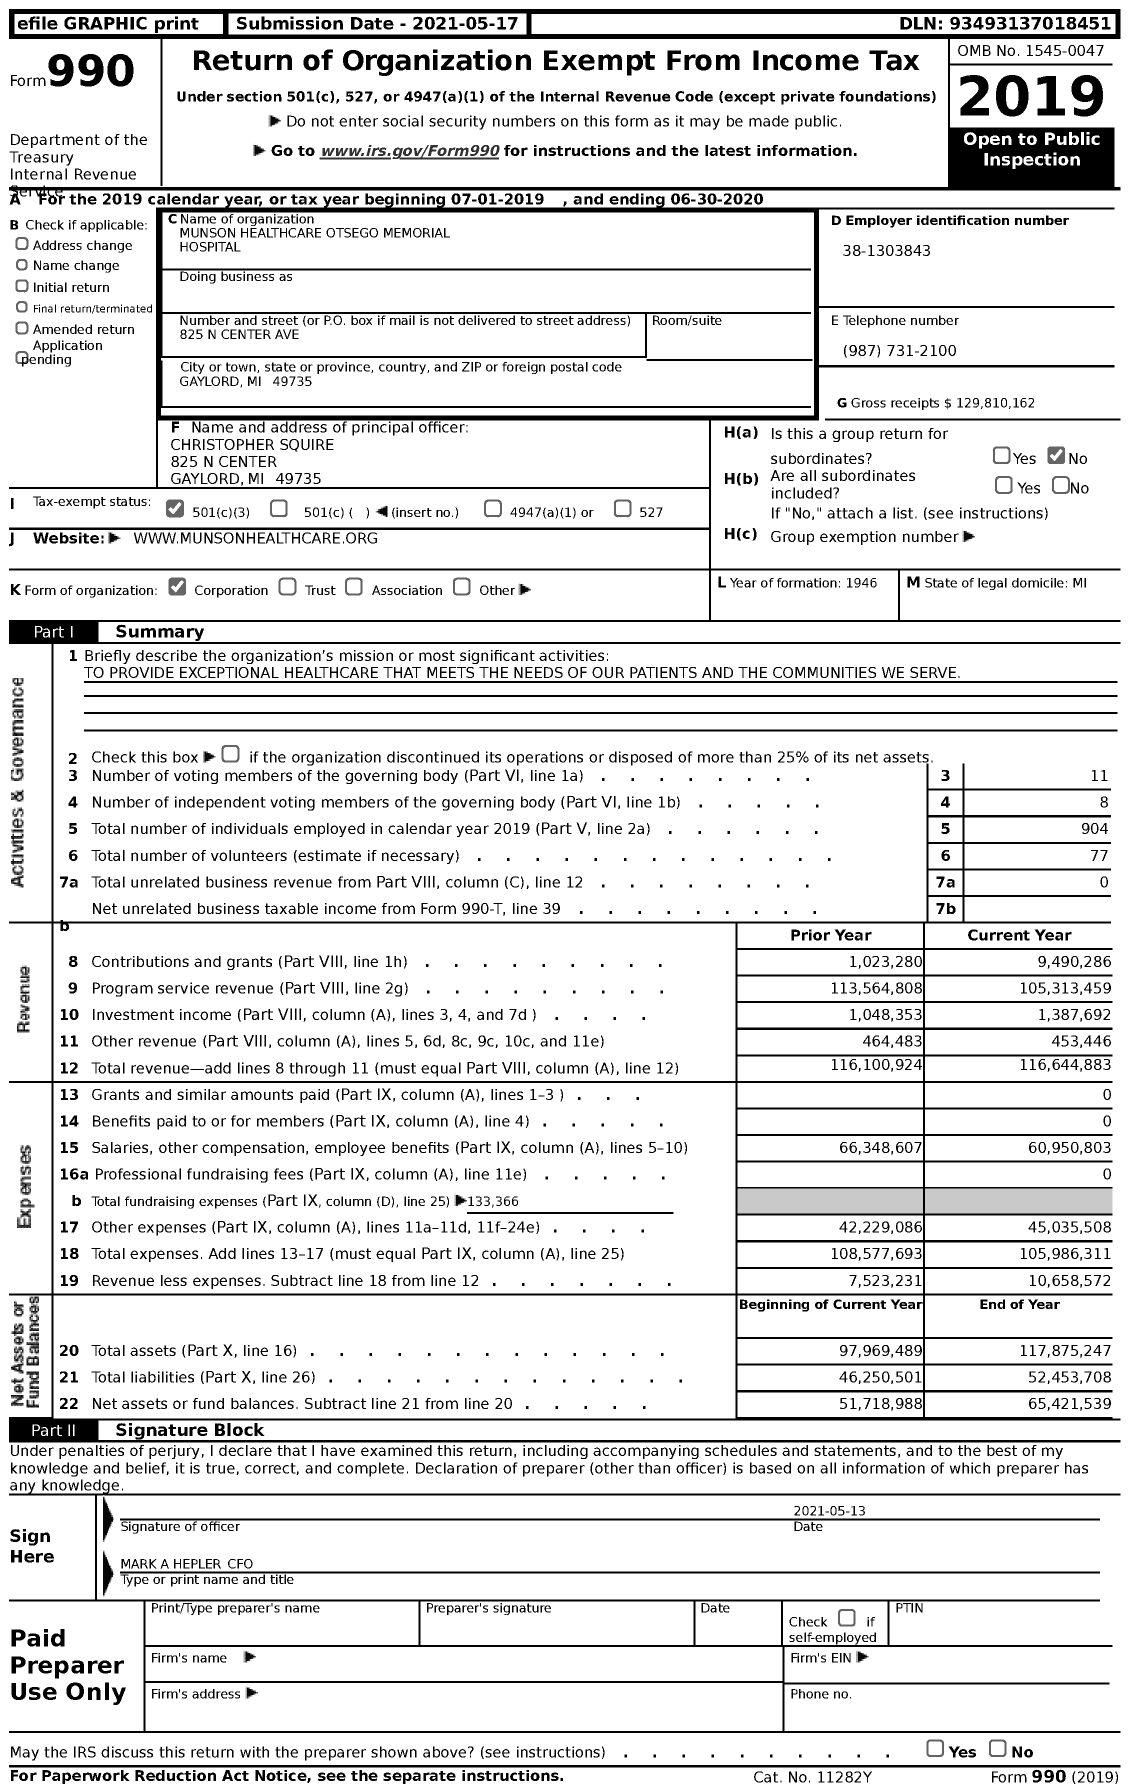 Image of first page of 2019 Form 990 for Munson Healthcare Otsego Memorial Hospital (OMH)